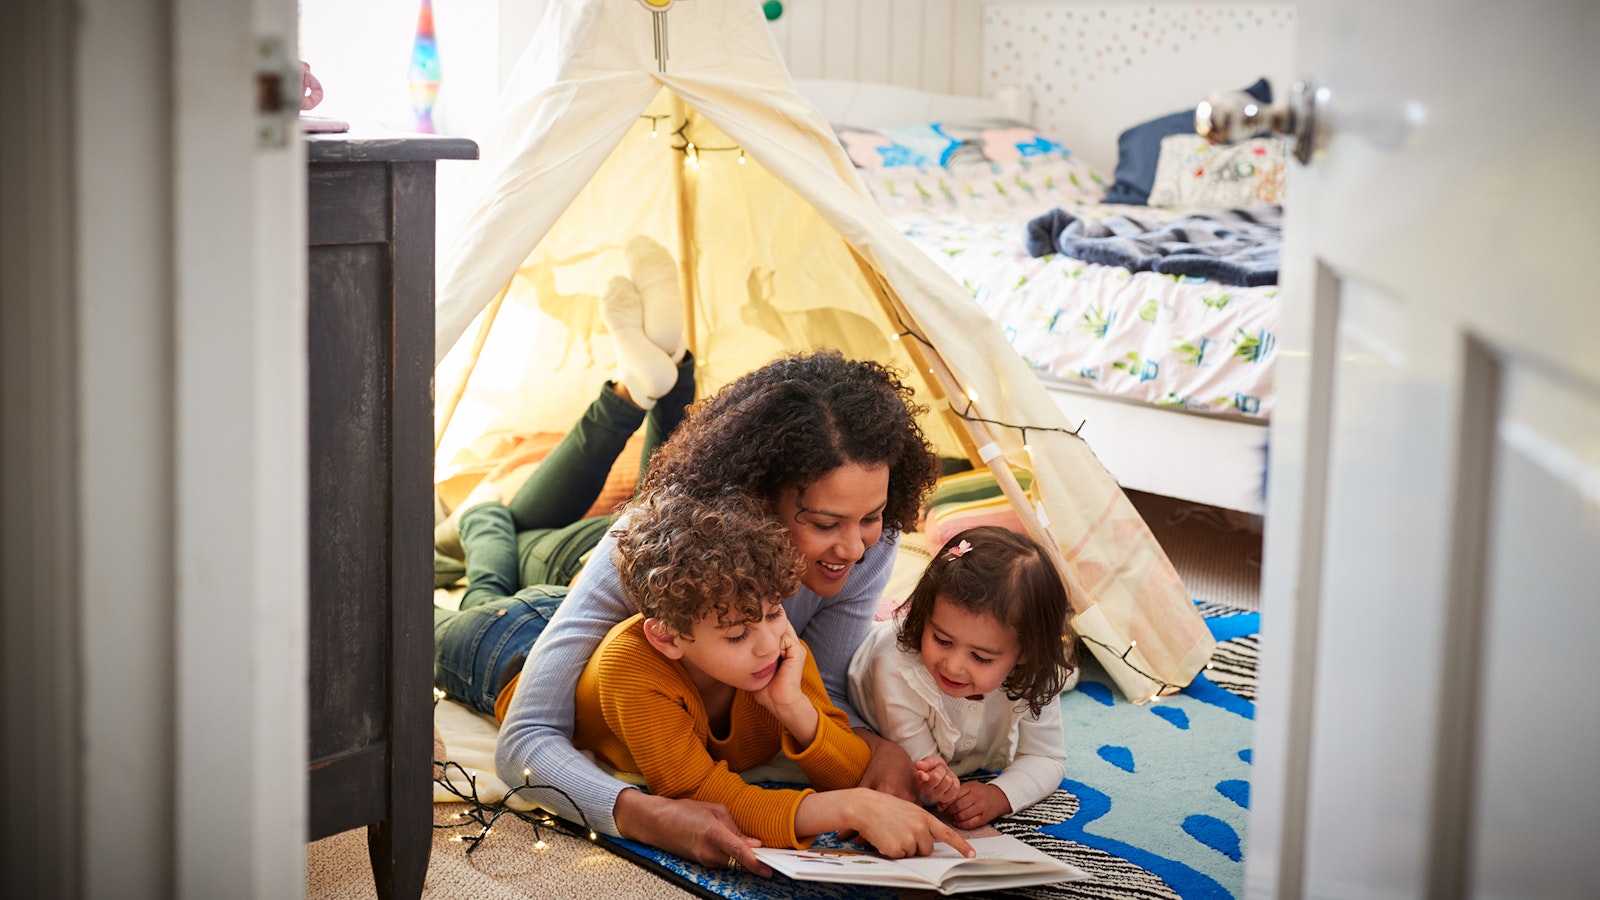 Family inside a tent, set up indoors.